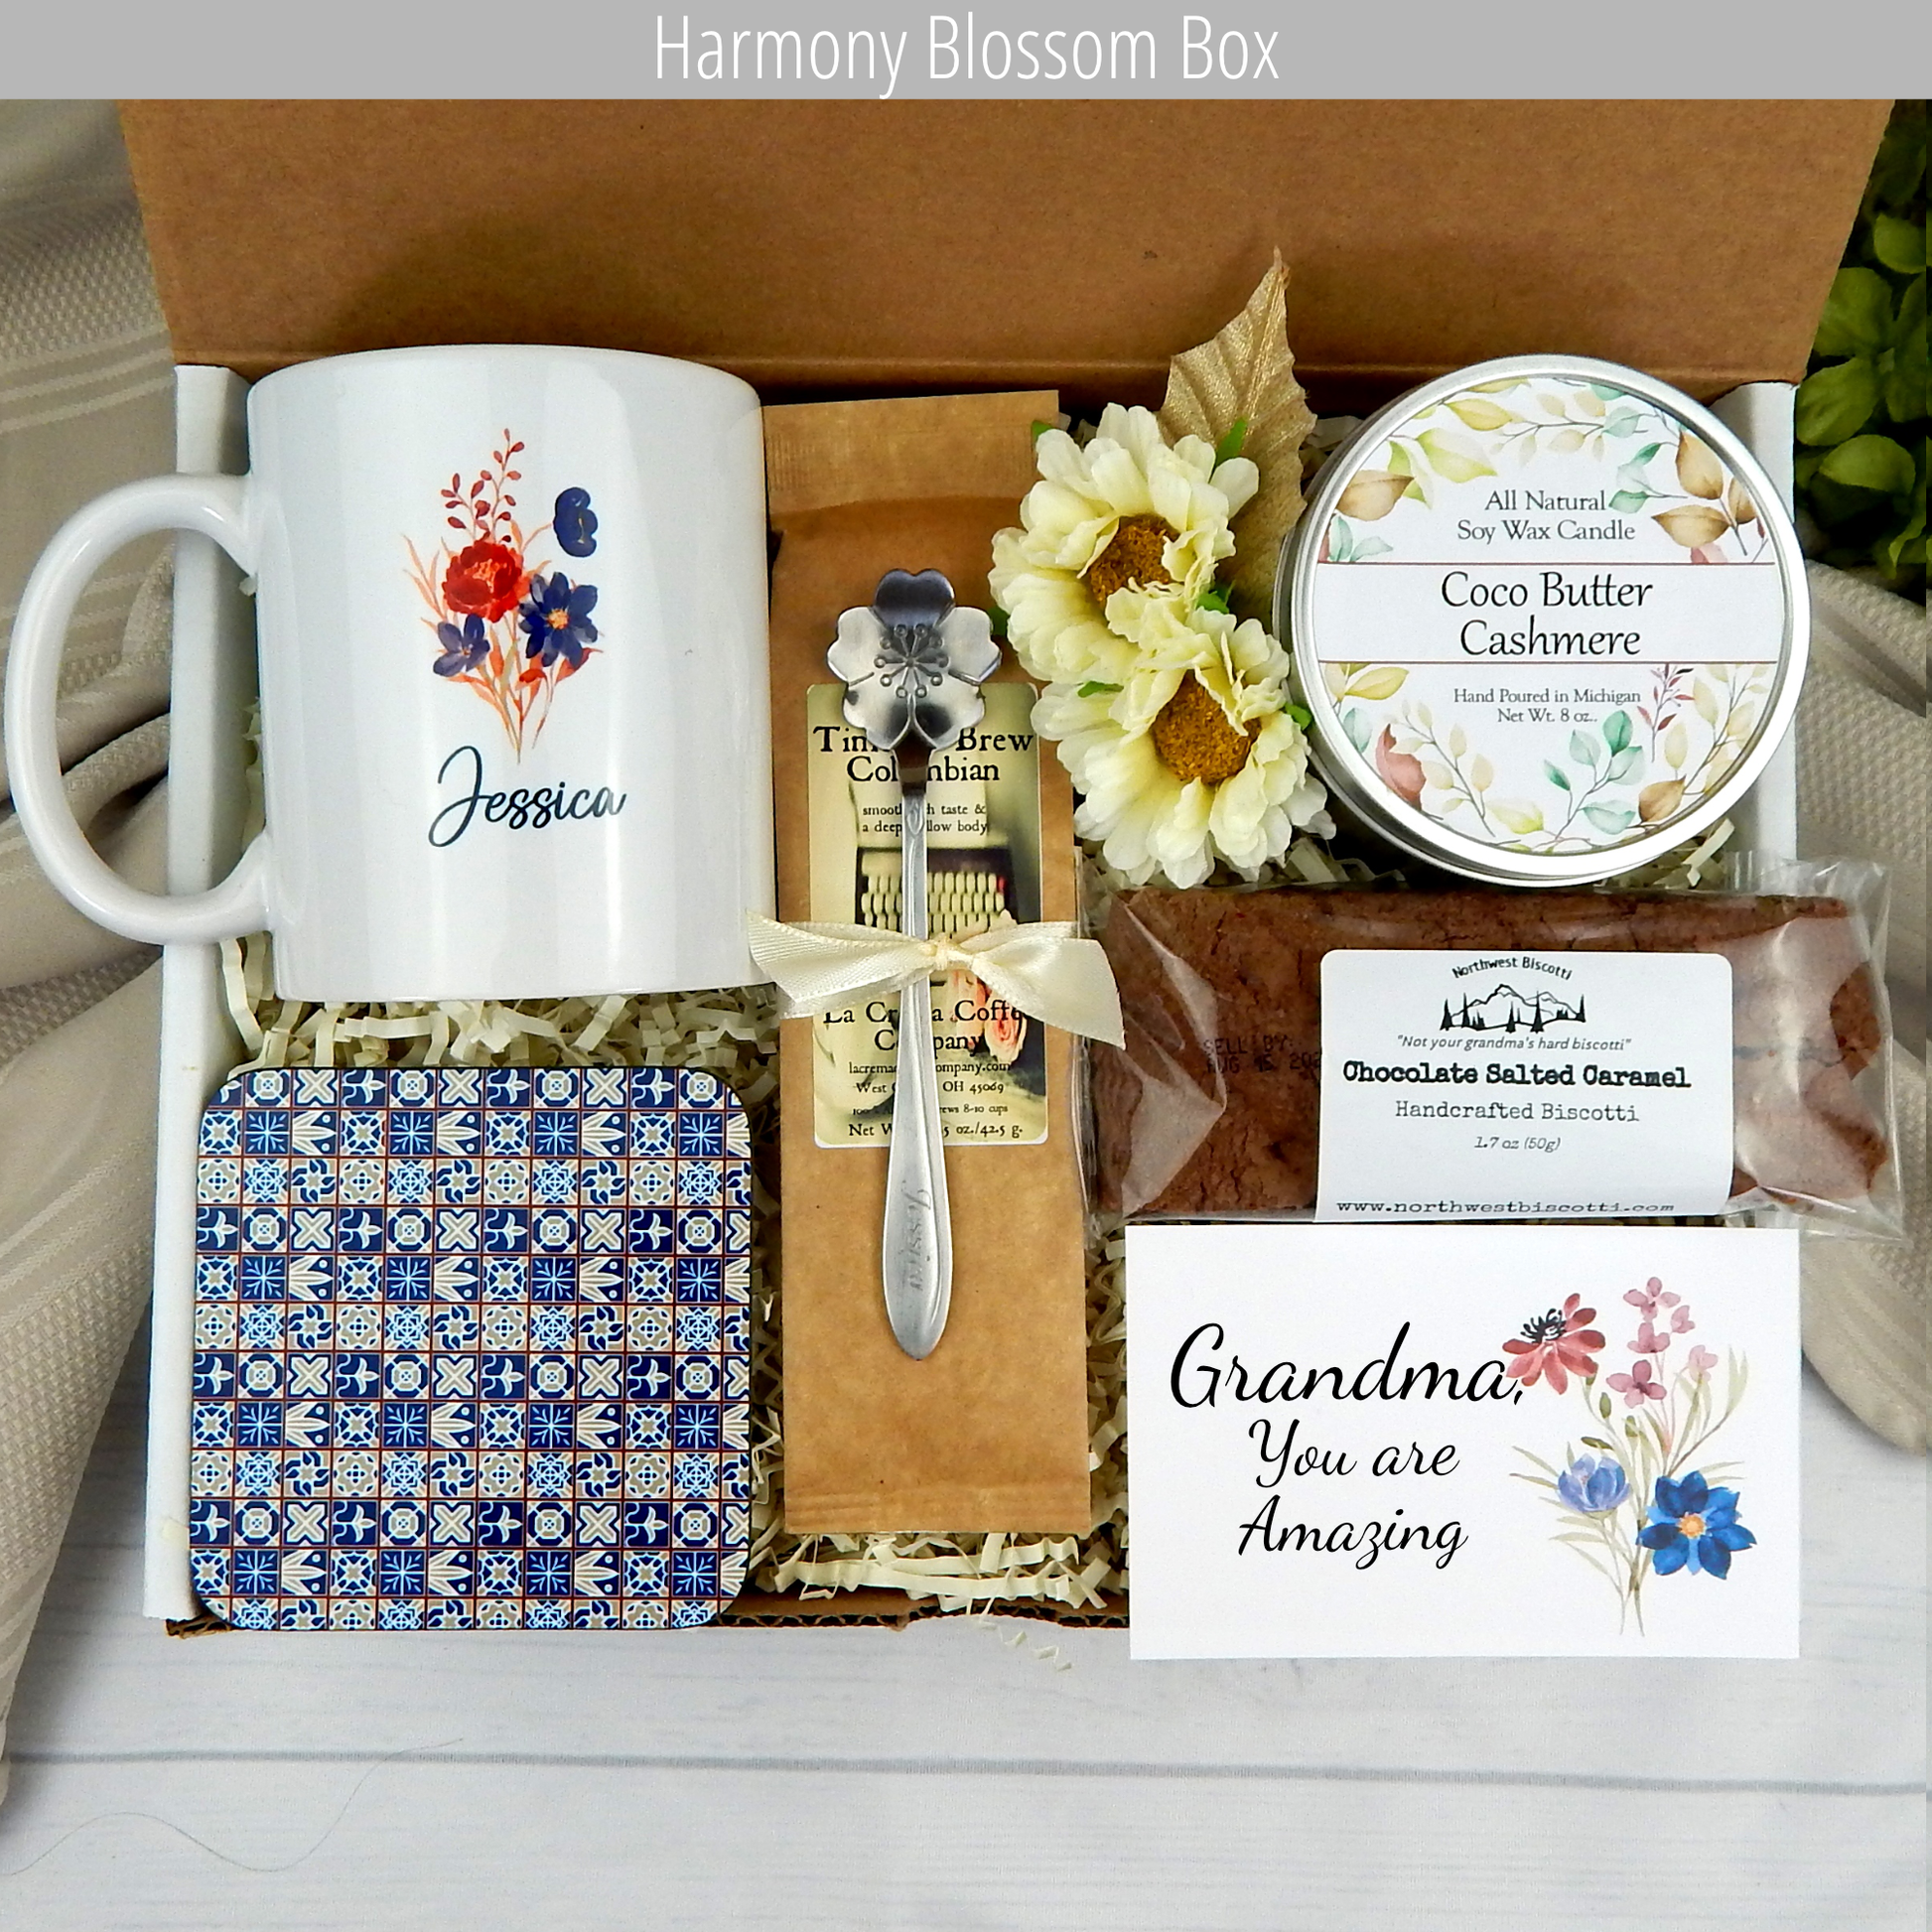 Present For Grandma - Care Package To Send Grandma in Assisted Living –  Blue Stone River